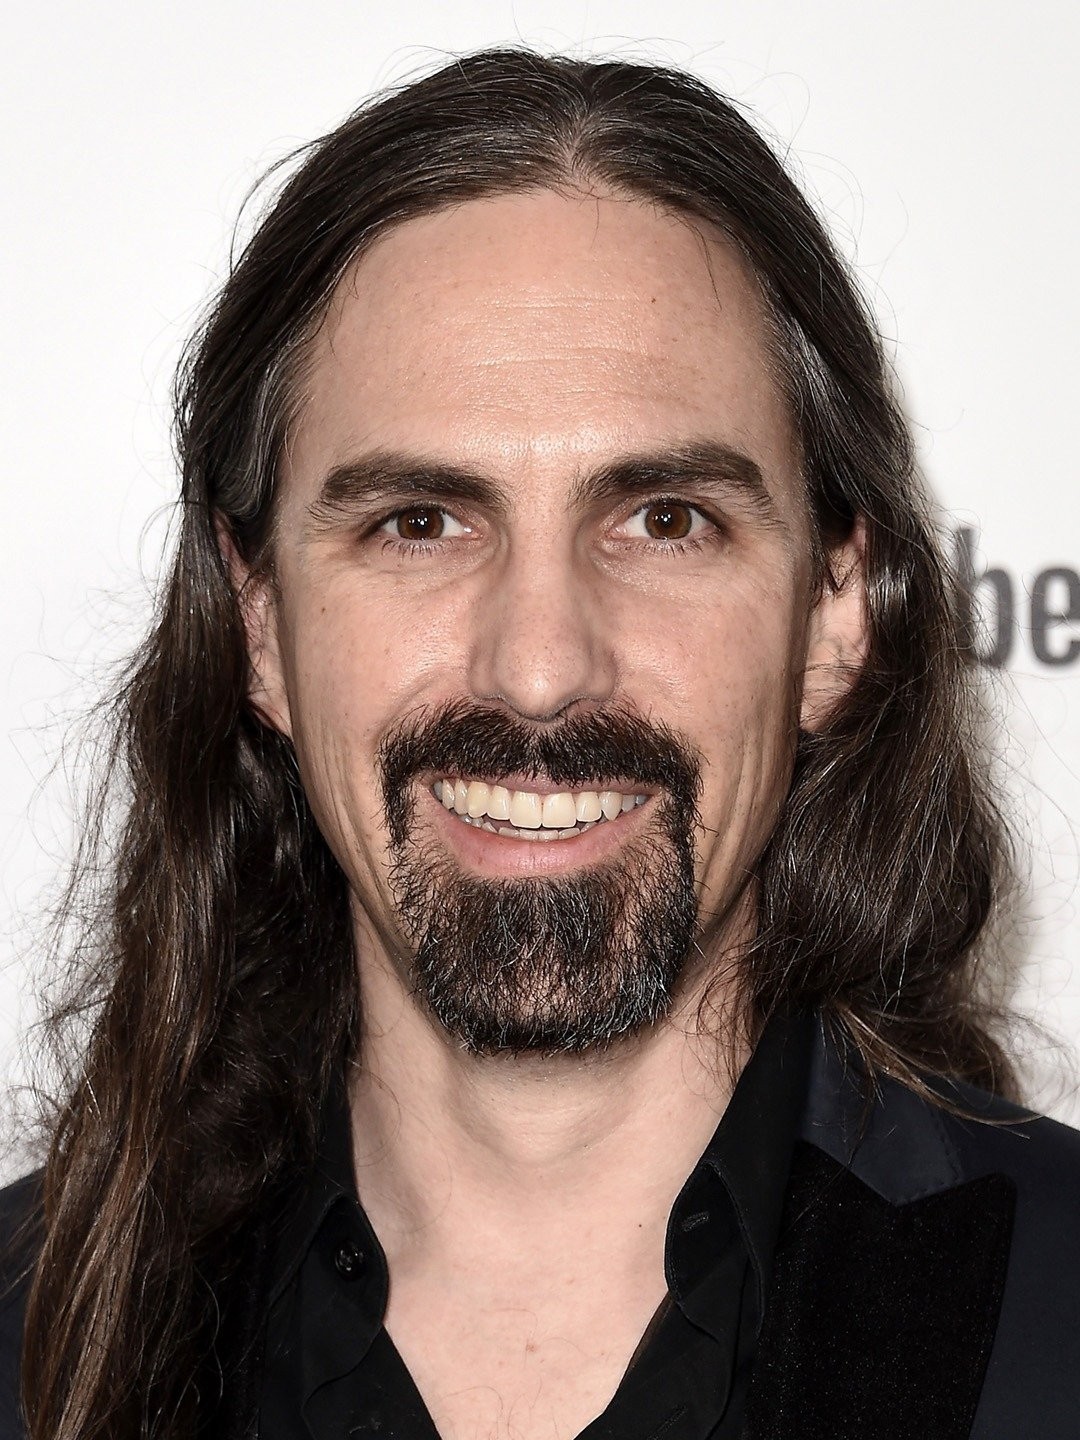 Bear McCreary  Composer of Film, Television, and Video Games Scores